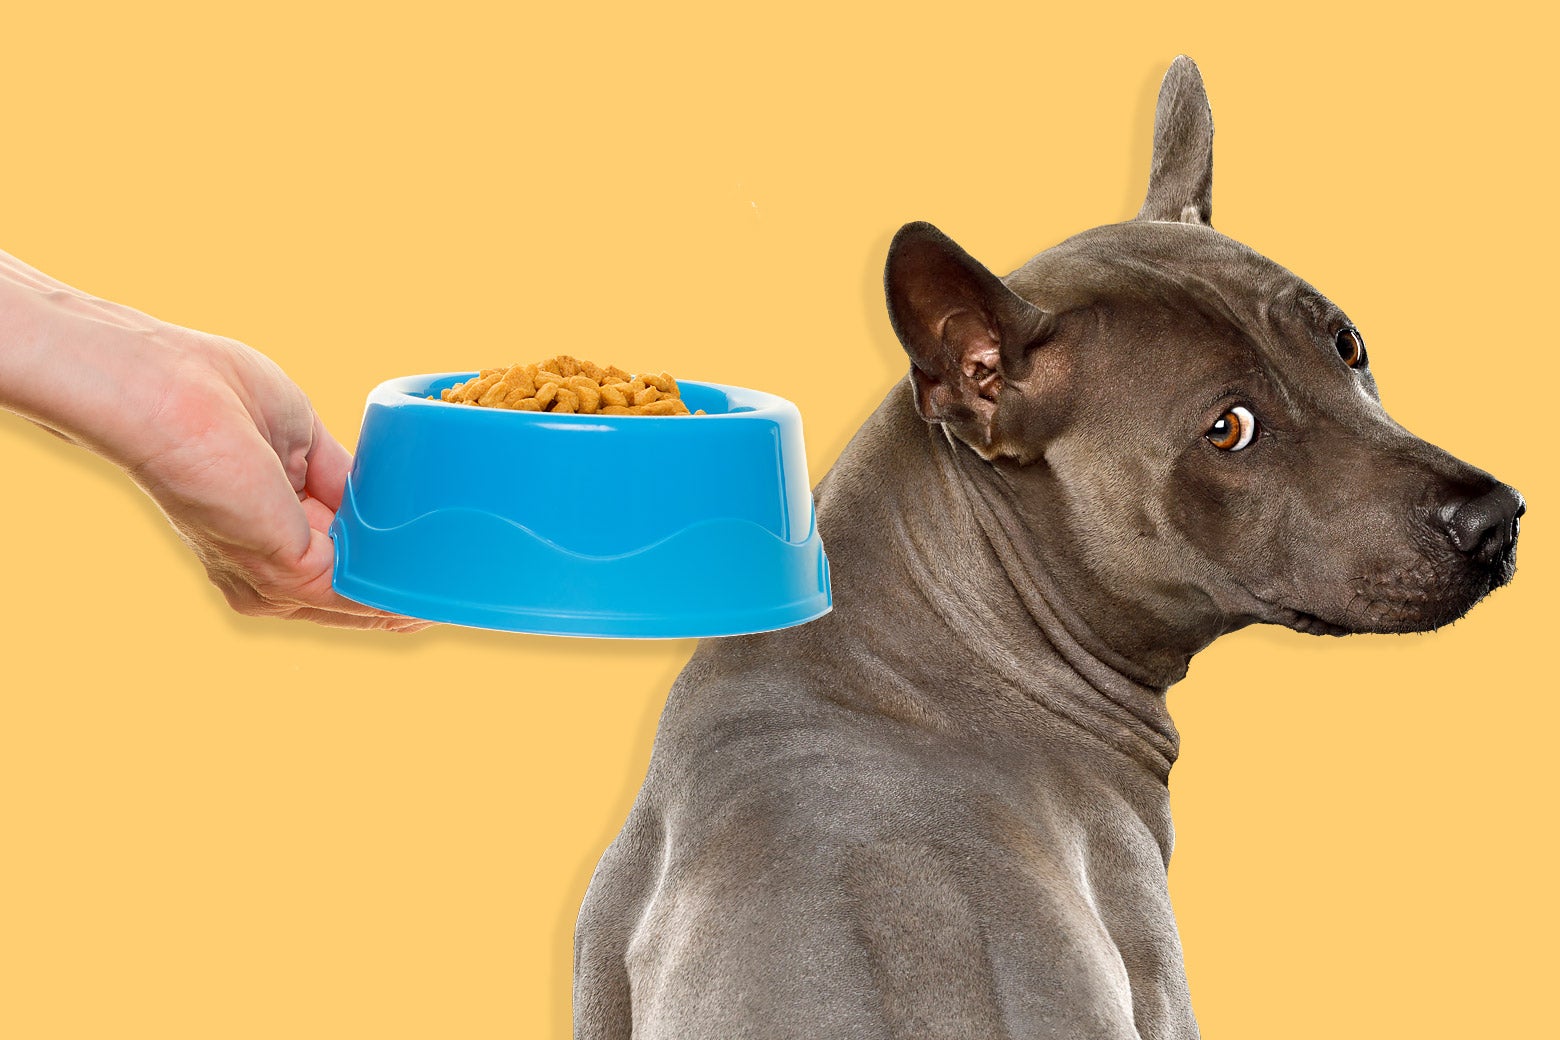 A dog turns its back on a bright bowl of food.